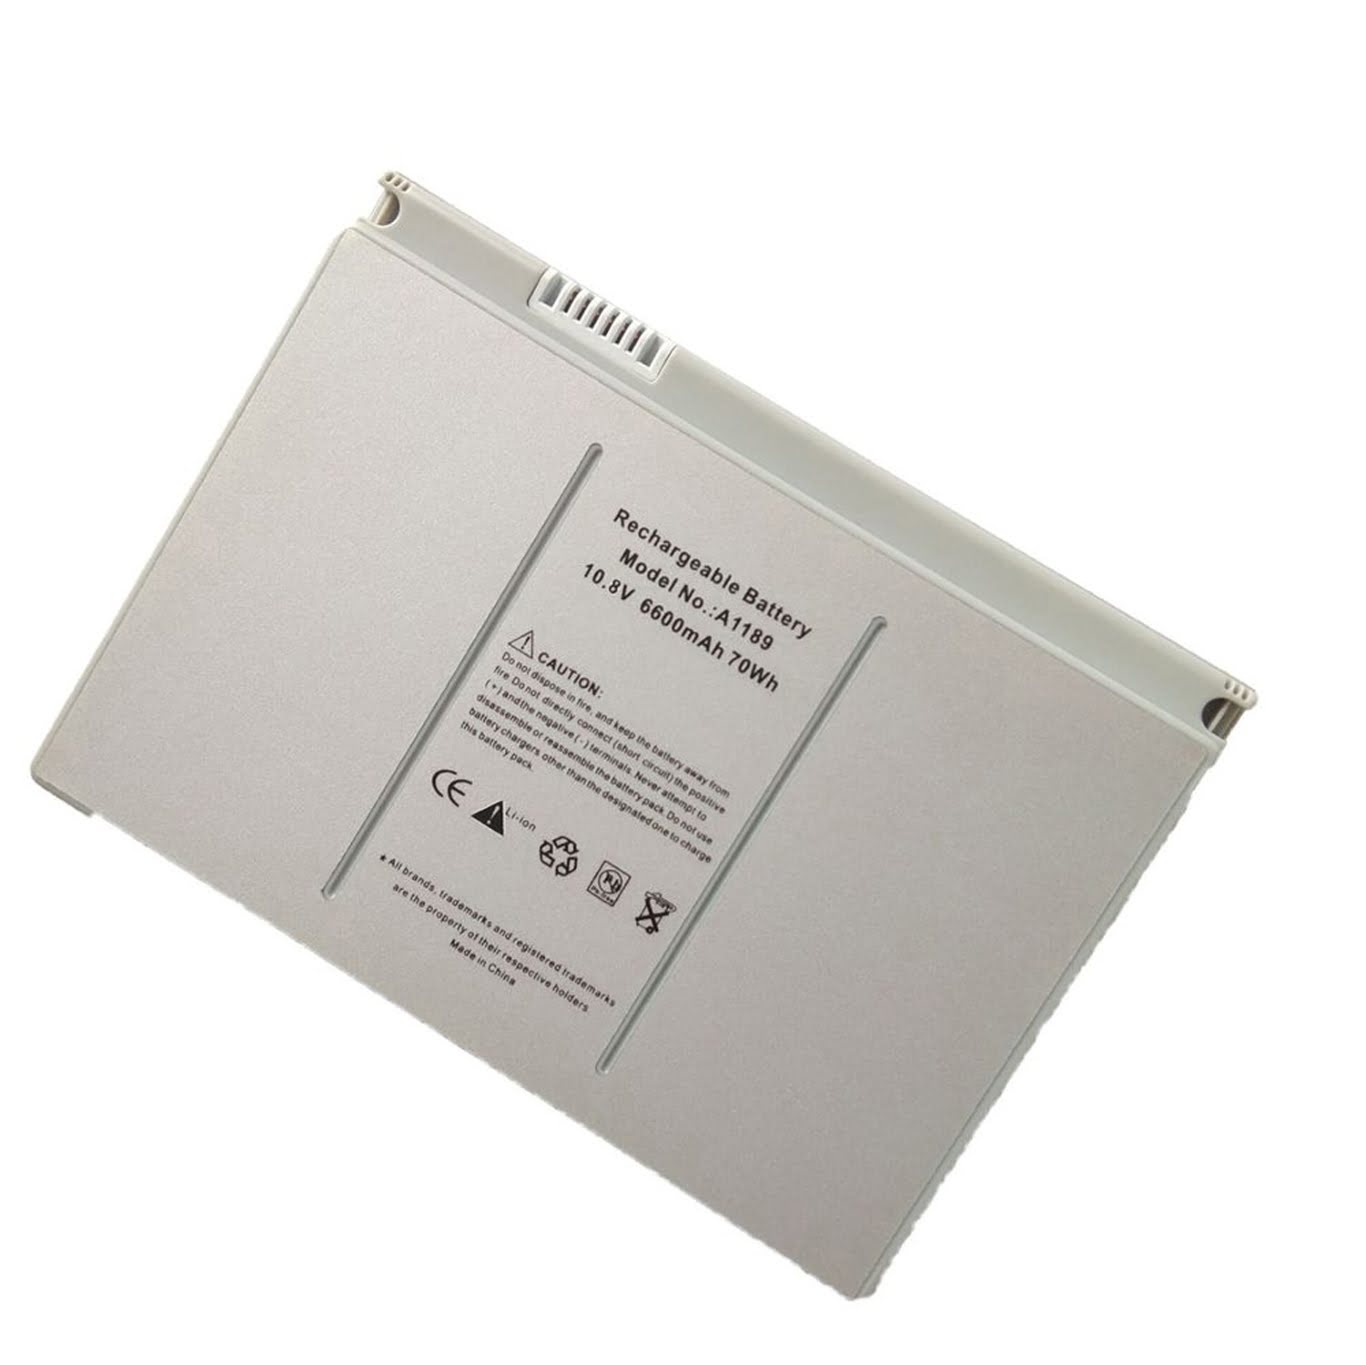 661-4618 A1189, MA458 MA458*/A replacement Laptop Battery for Apple MacBook Pro 17